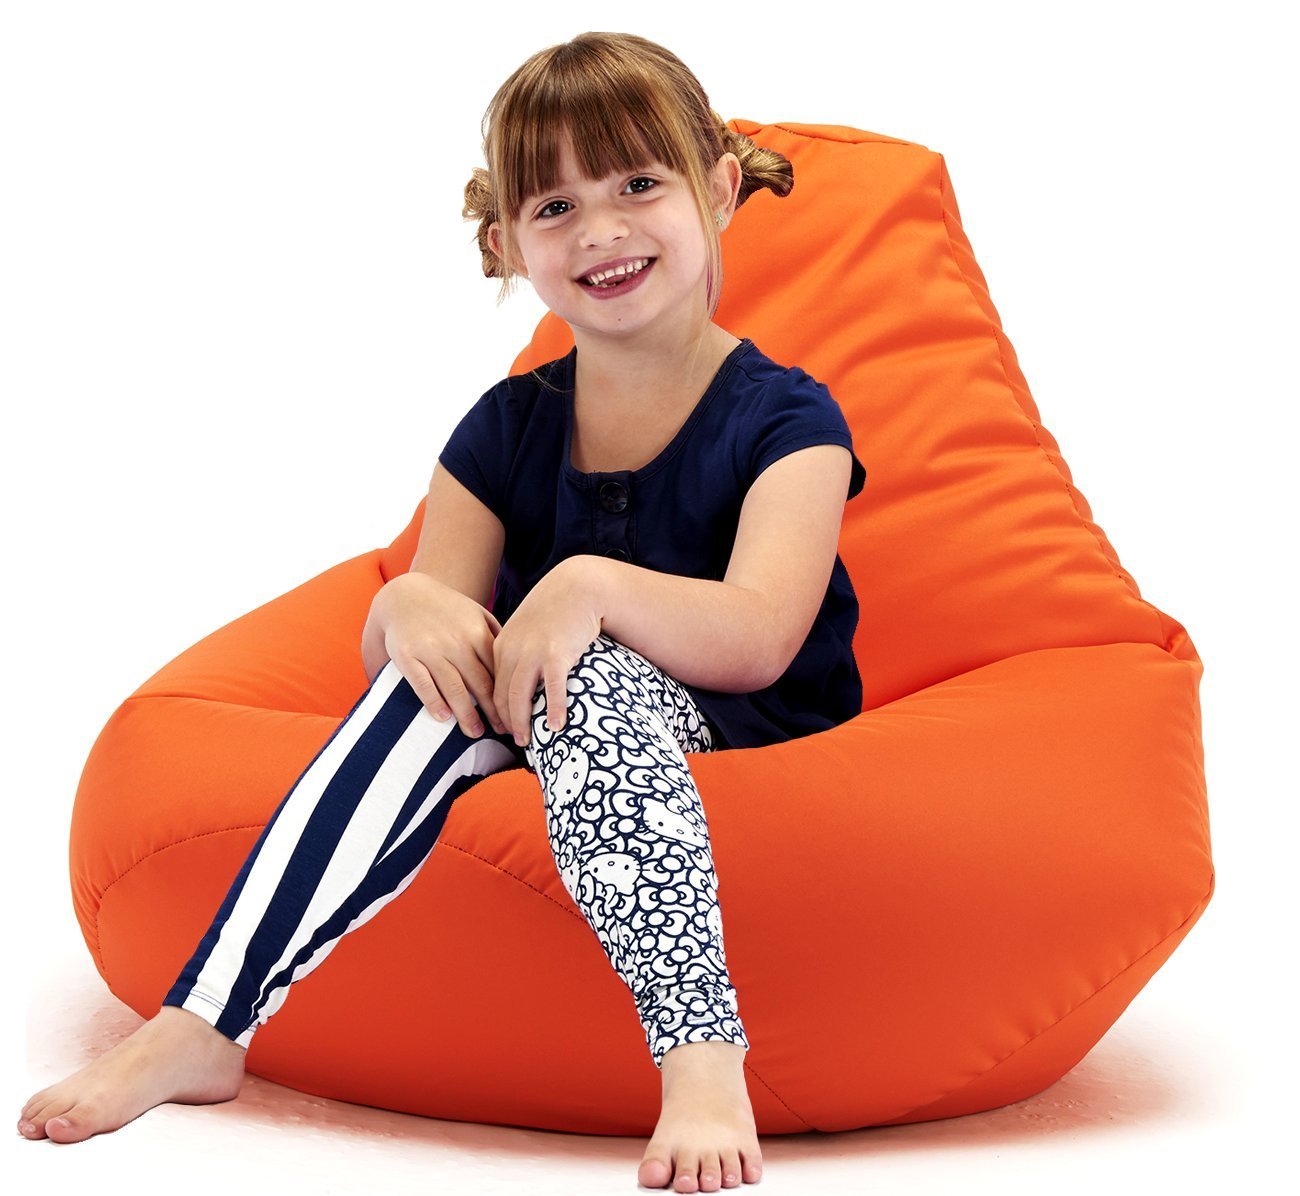 Giant Lounging Bean Bag Chair, The Giant Lounging Bean Bag Chair is a classic round shape bean bag perfect for schools and homes - practical, functional and fun soft seating.The Giant Lounging Bean Bag Chair has a robust design and is hard wearing for the rough and tumble of a home or primary school environment.A comfortable seating chair will encourage your children to relax, read and enjoy quiet time.The splash proof polyester fabric can even be used as part of an outdoor classroom environment - we've had